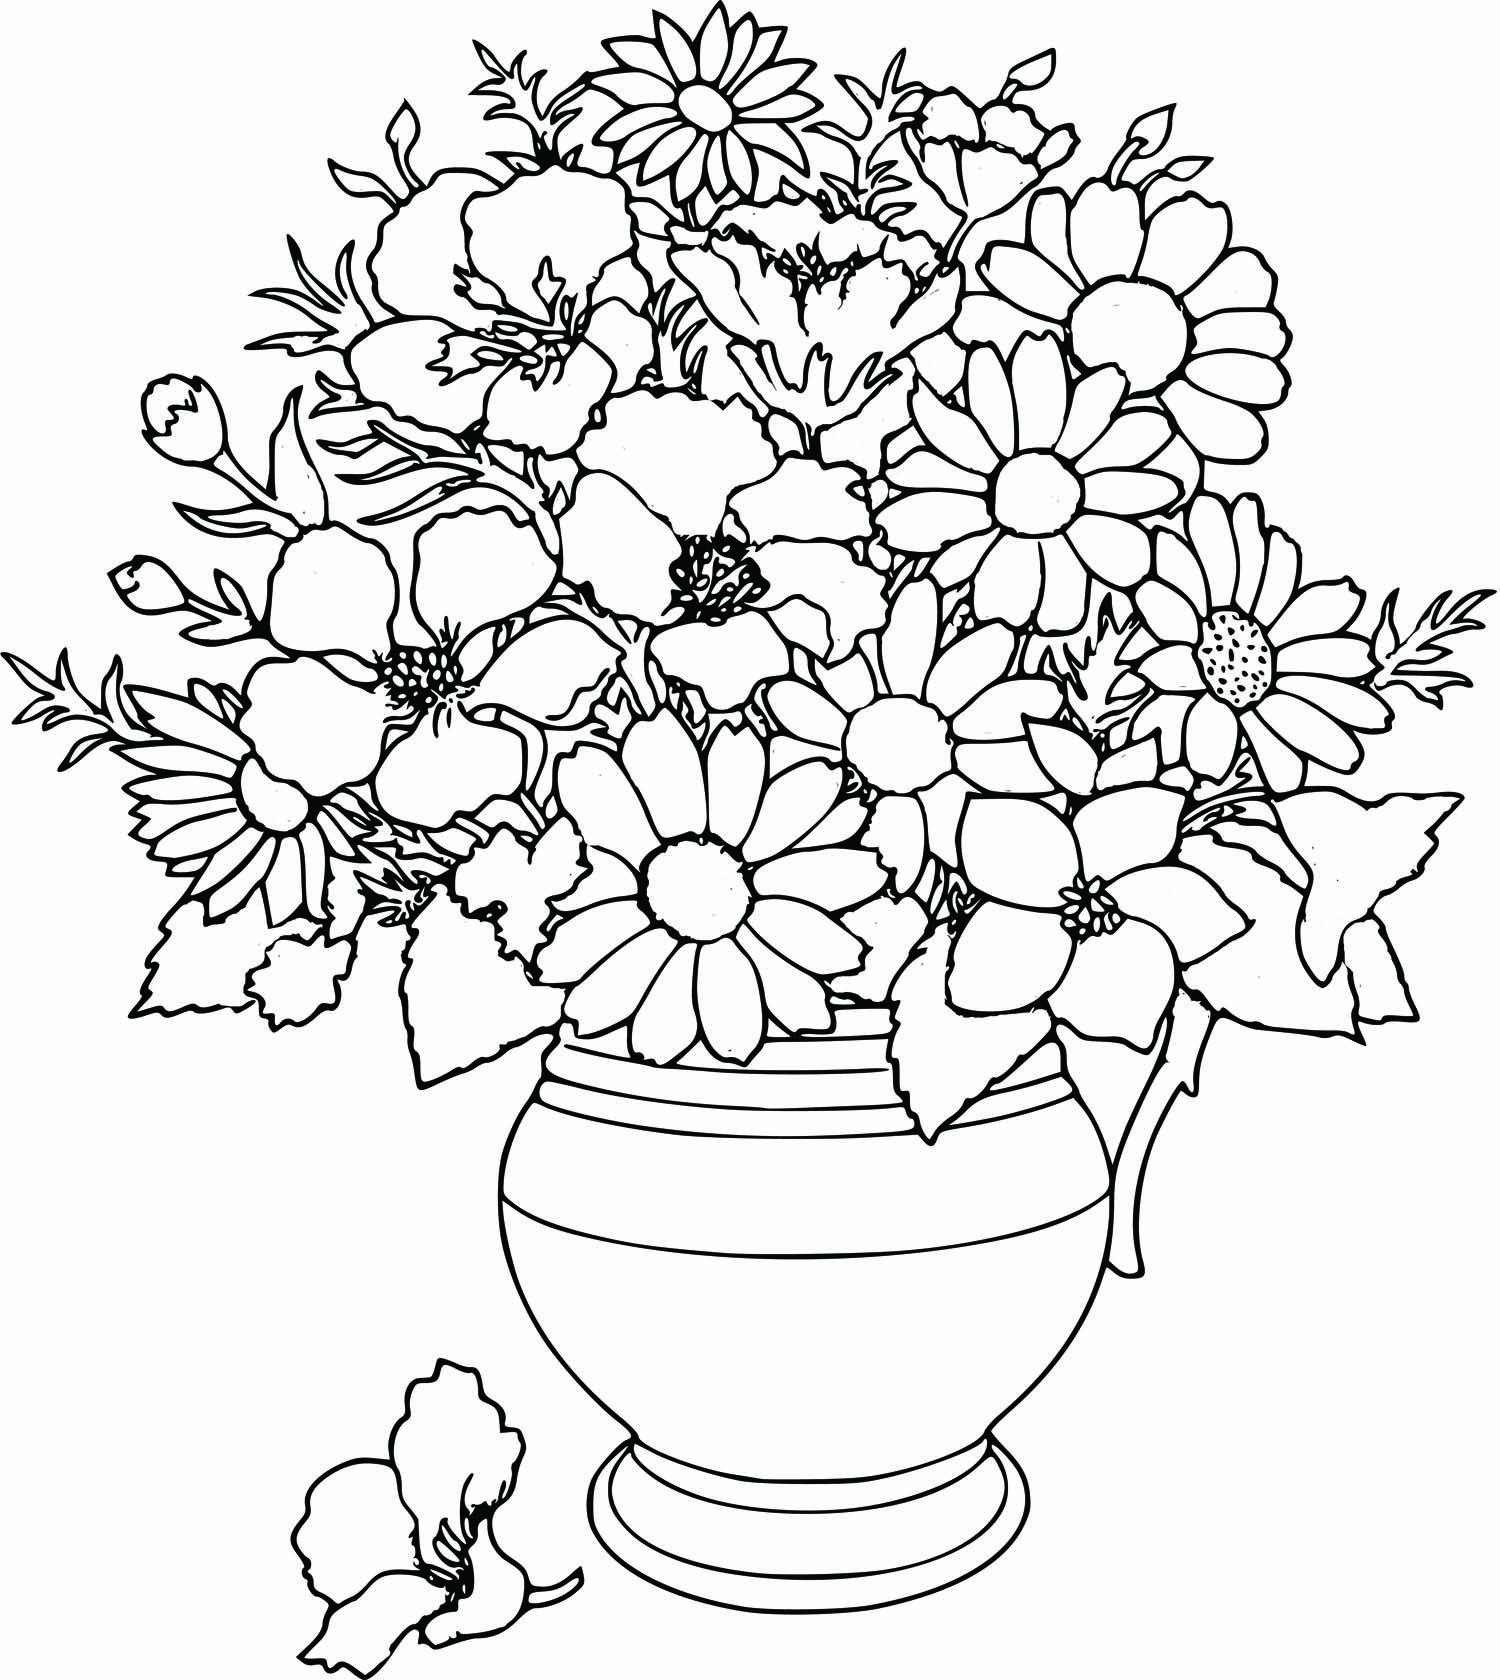 Free Coloring Pages For Girls Flowers
 Free Beautifull Flower Coloring Pages